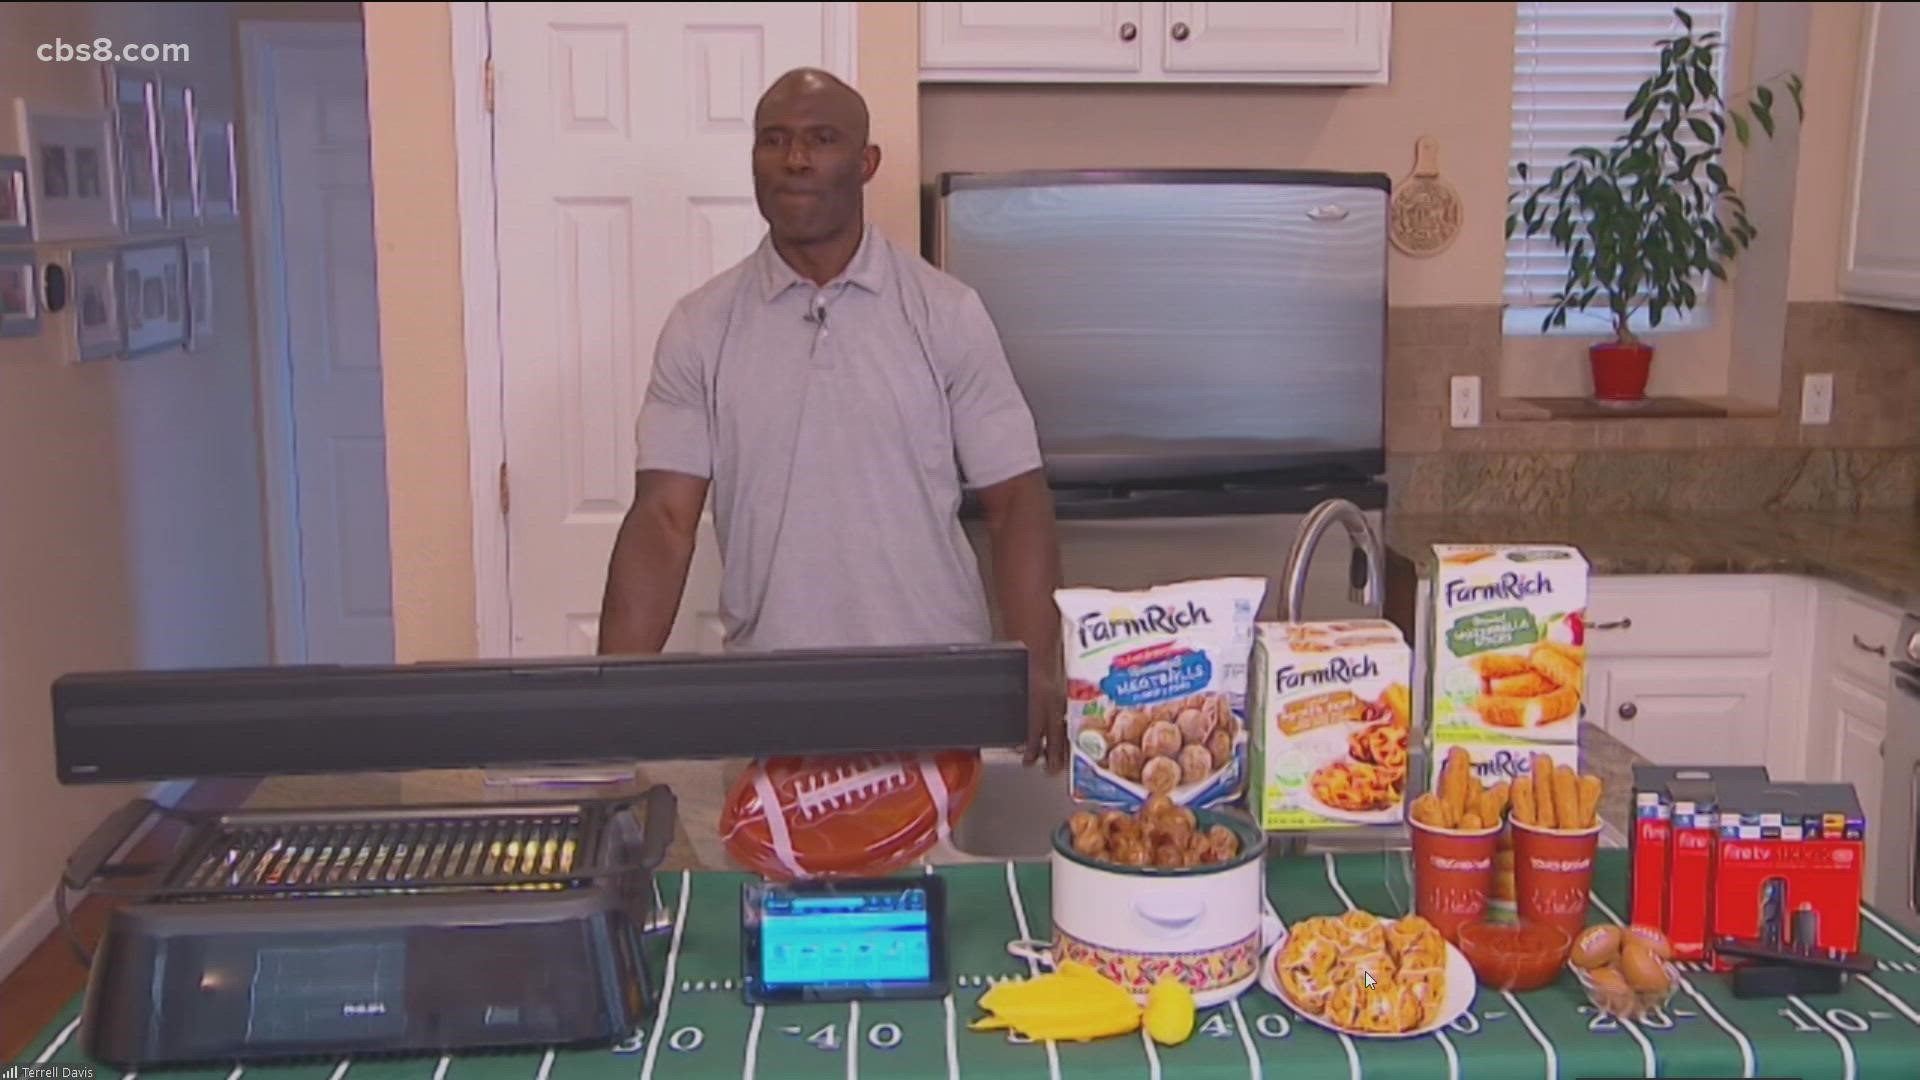 Two-time champ & former Big Game MVP Terrell Davis shared everything you’ll need to host the ultimate party.